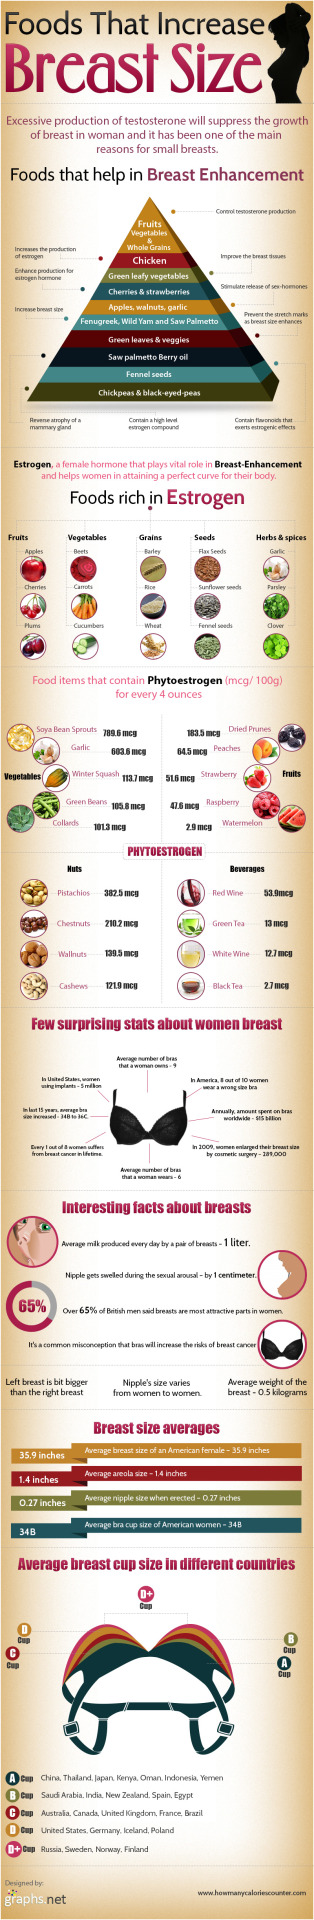 The Breast Expansion Diet Eat these foods to increase the size of your breasts permanently!